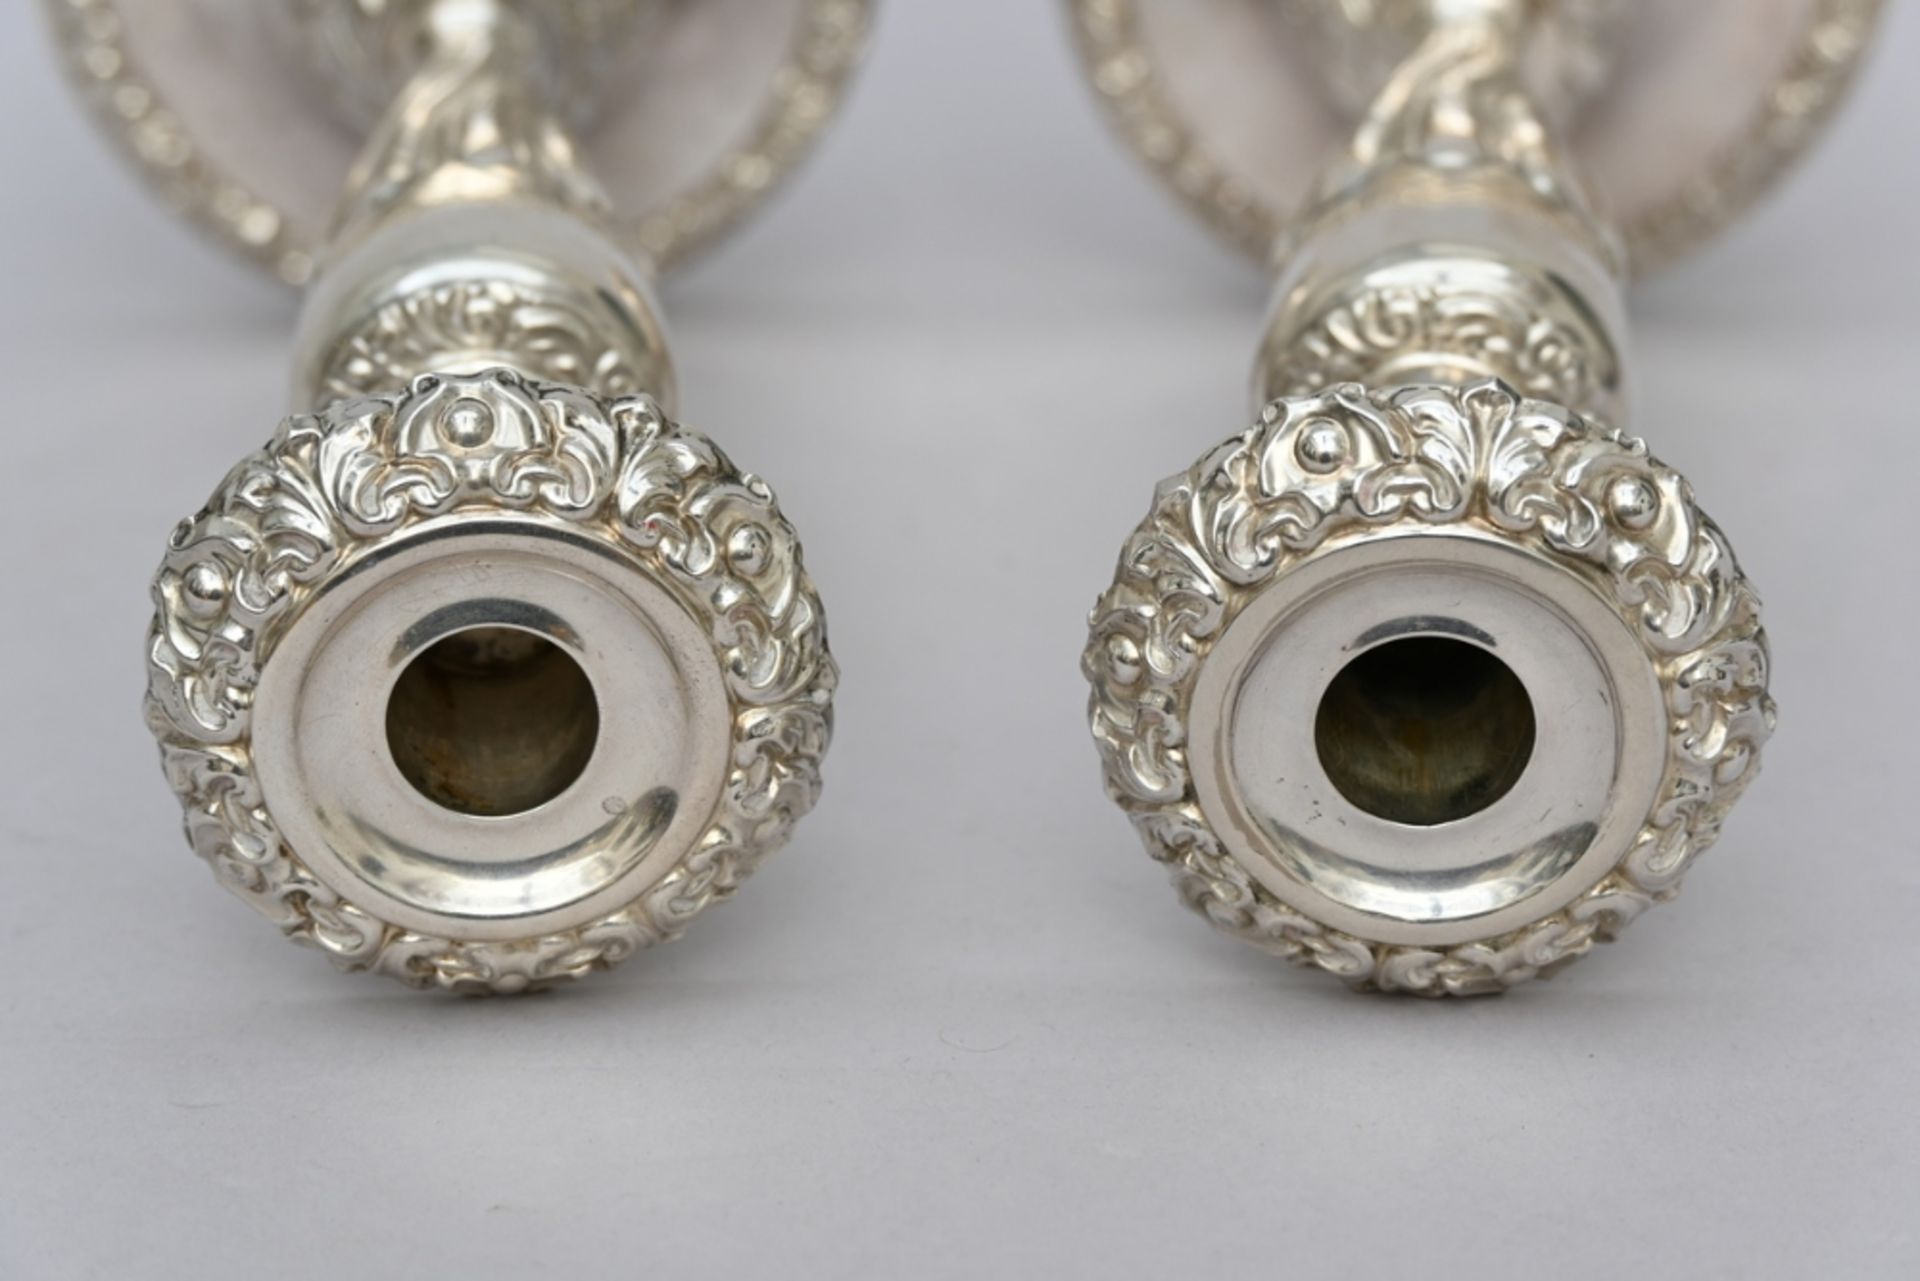 A pair of silver Louis-Philippe candlesticks, Liege 19th century (h31cm) (weight 770gr) - Image 2 of 4